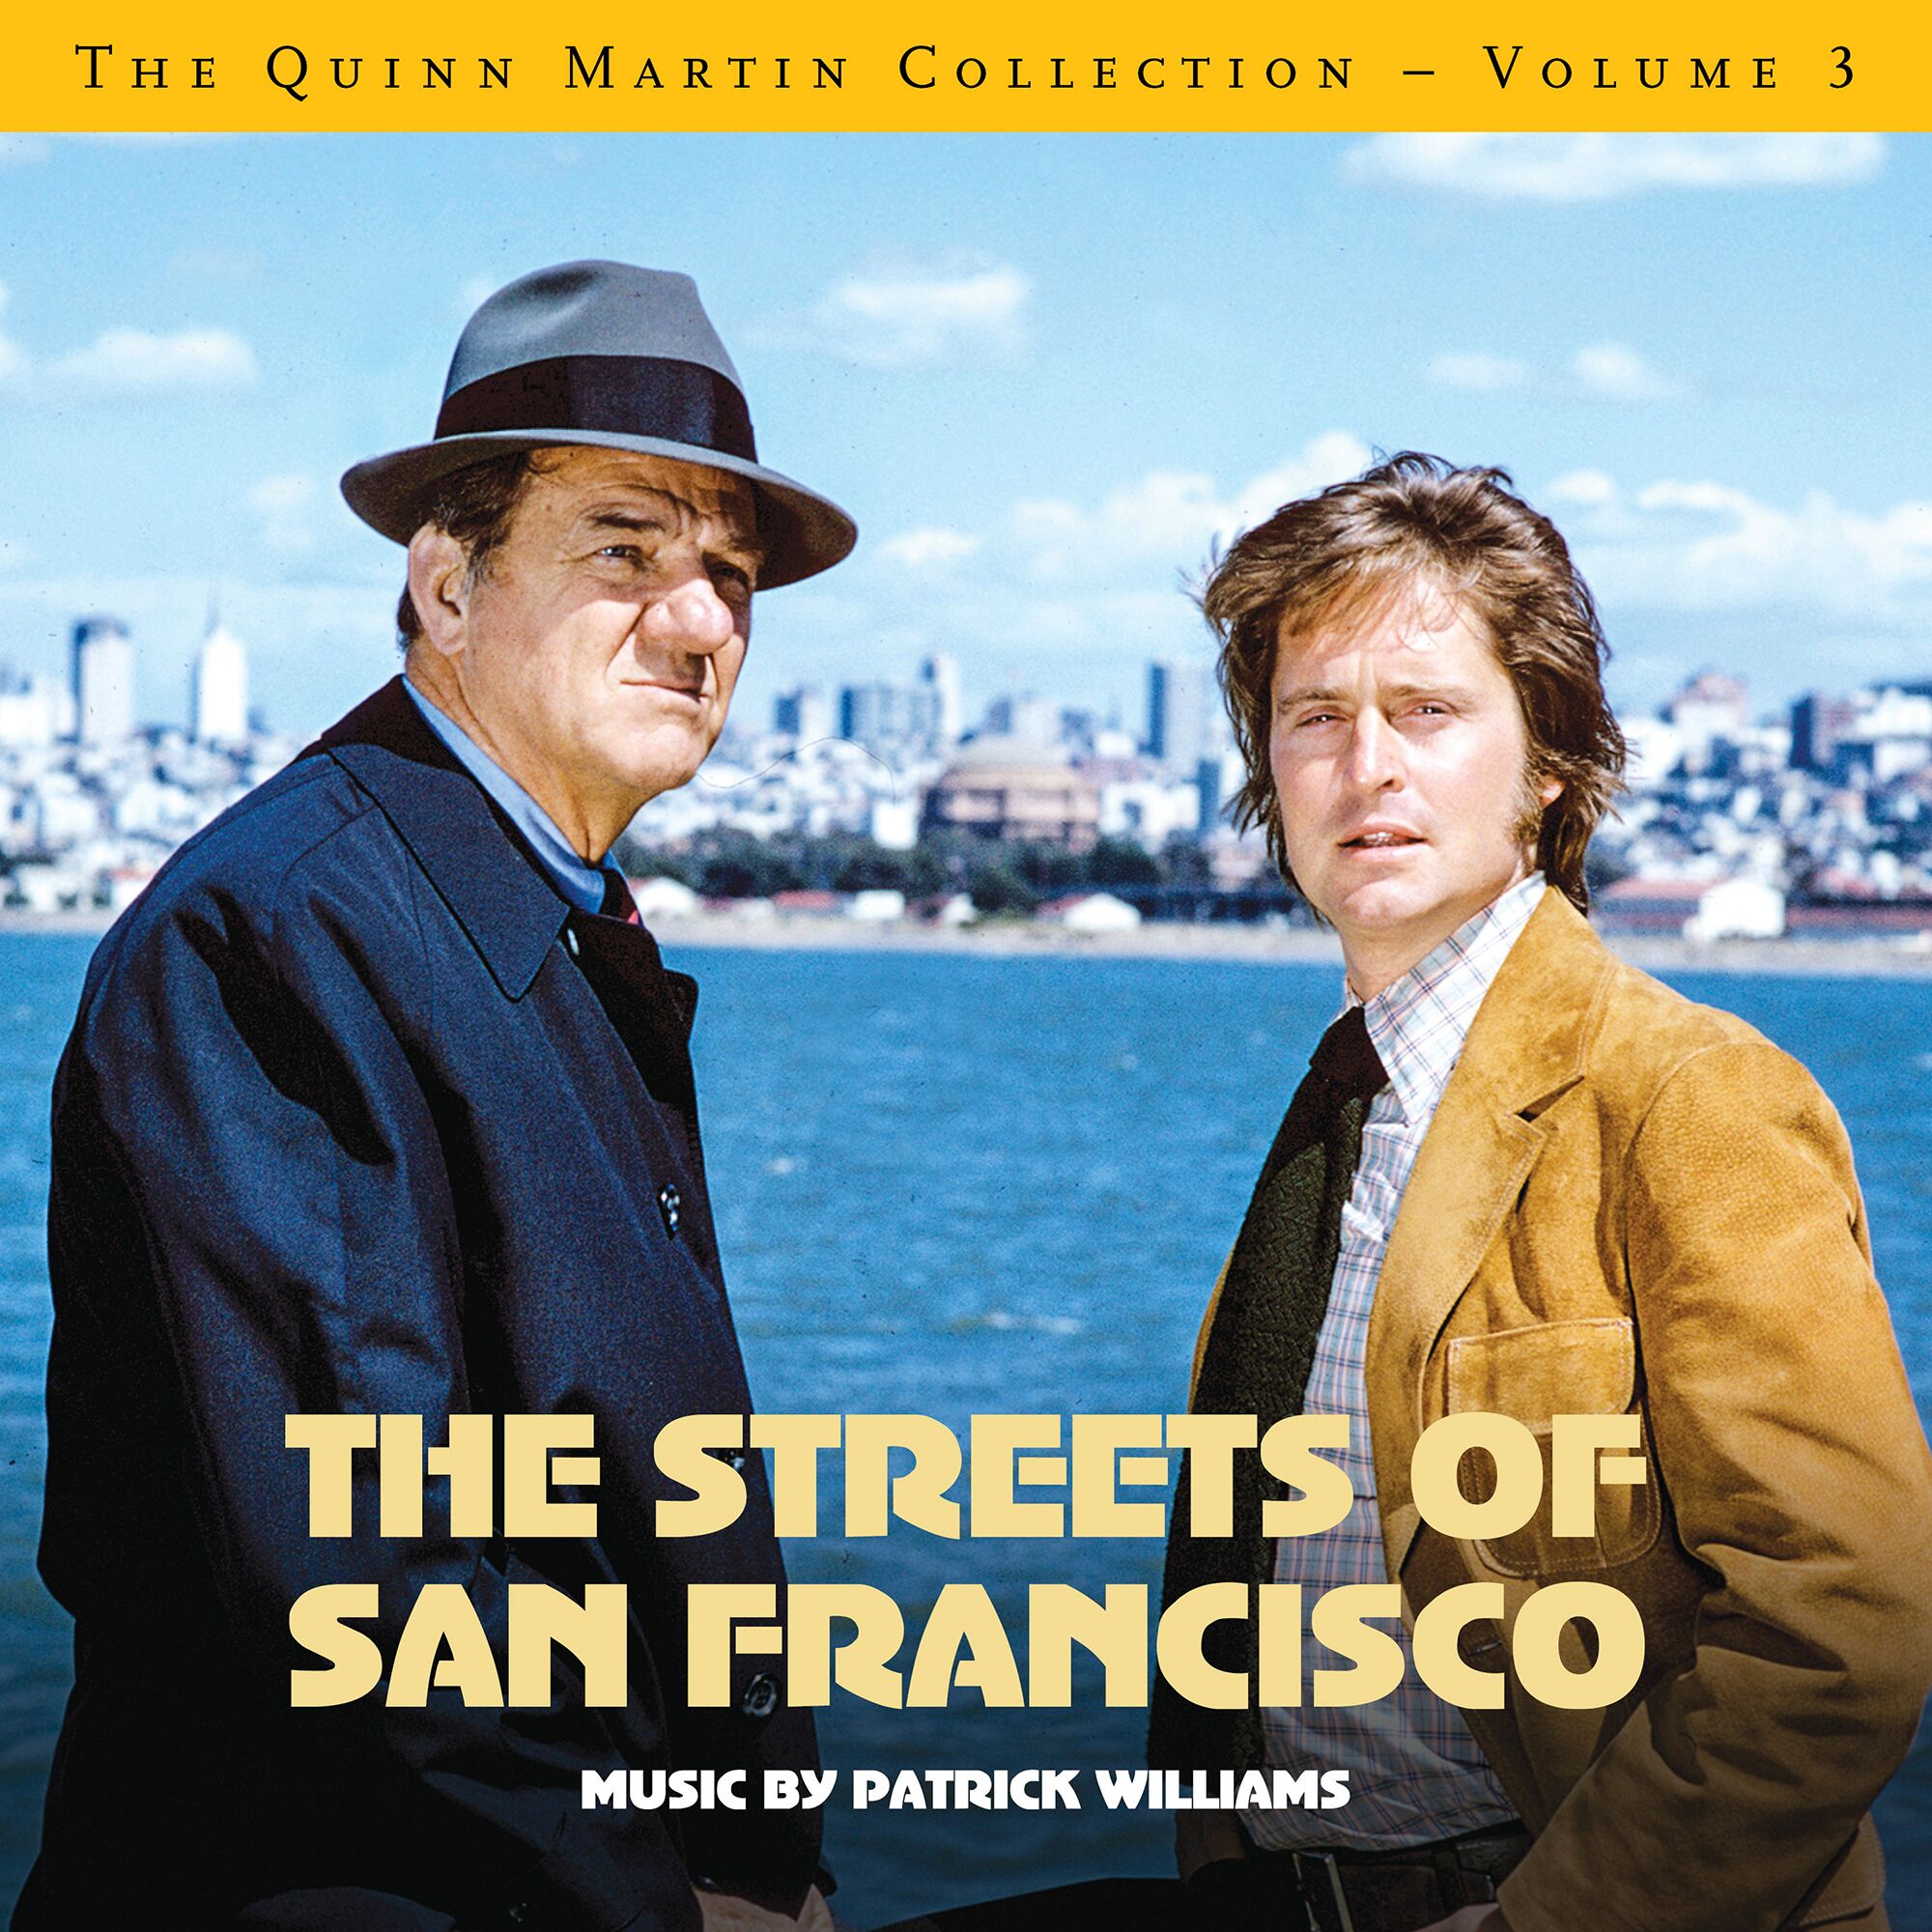 "The Streets of San Francisco," music by Patrick Williams.